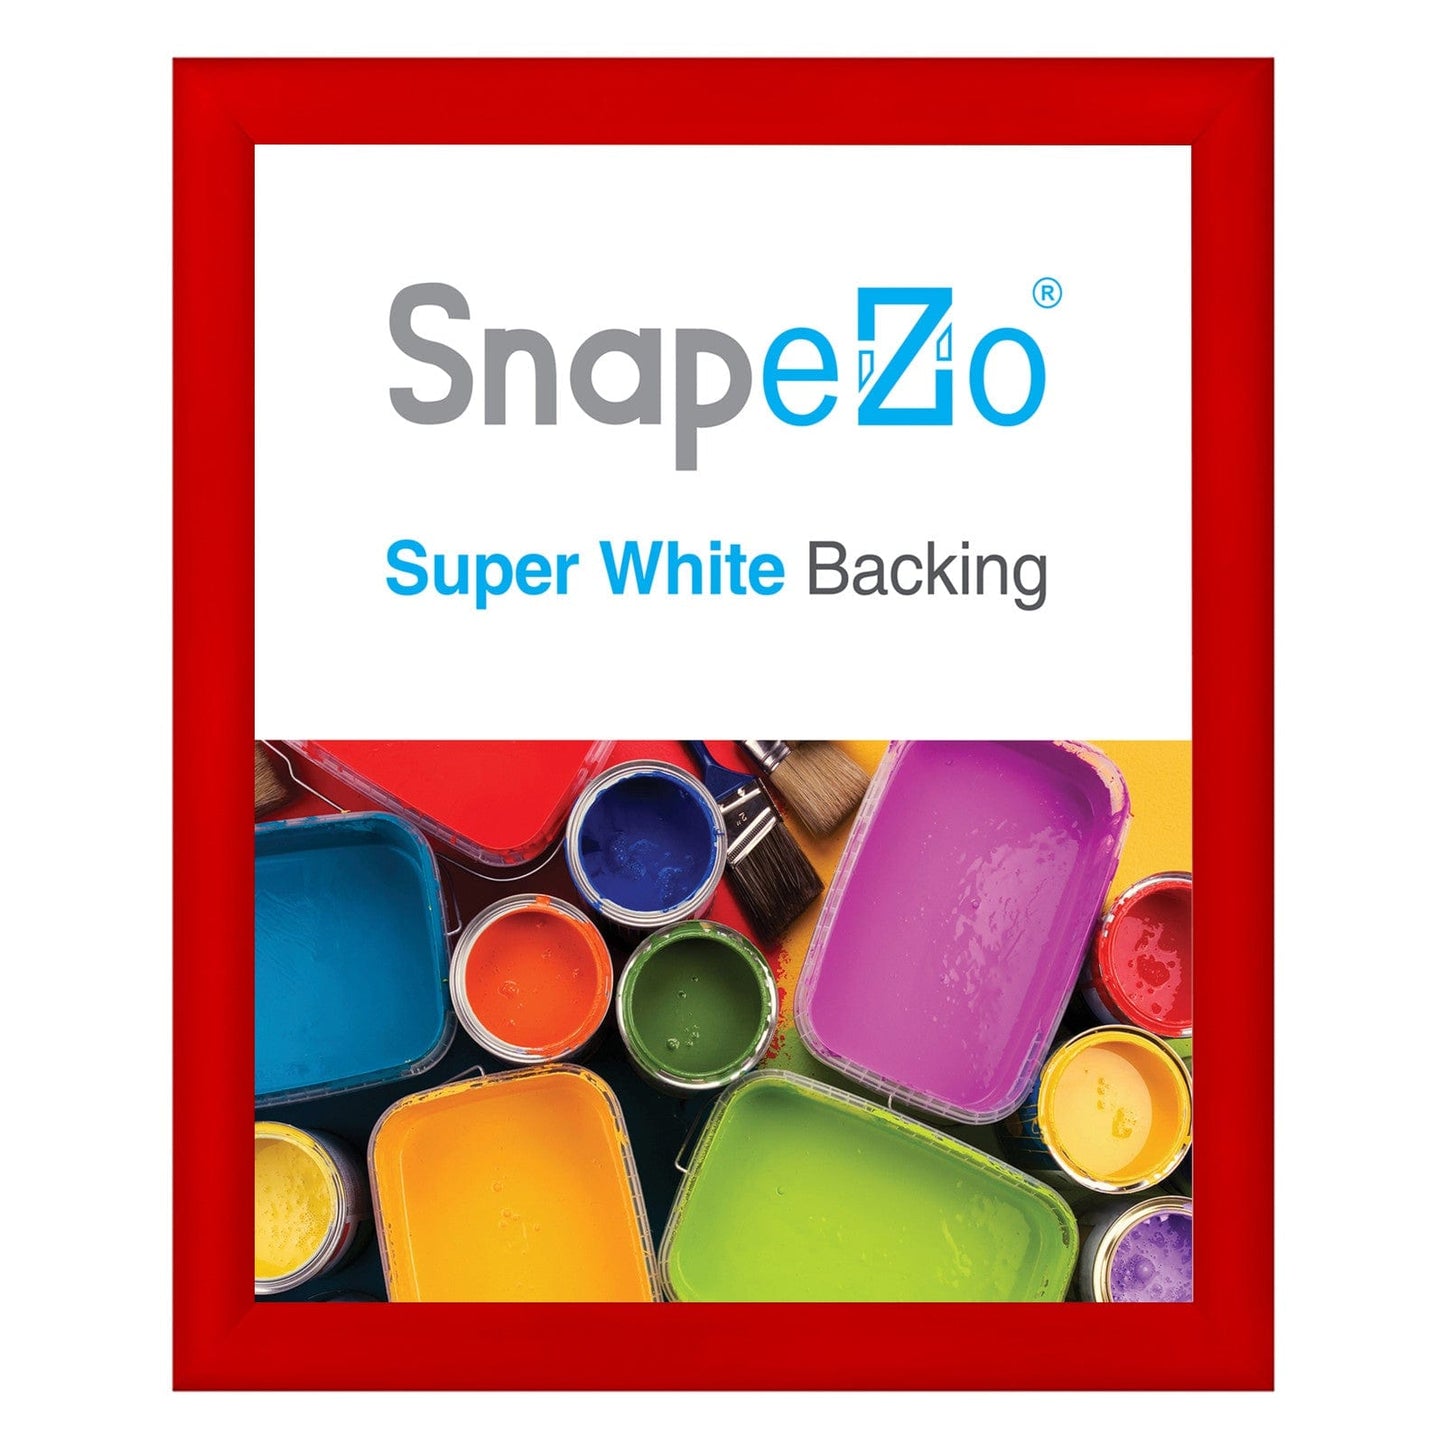 29x36 Red SnapeZo® Snap Frame - 1.2" Profile - Snap Frames Direct